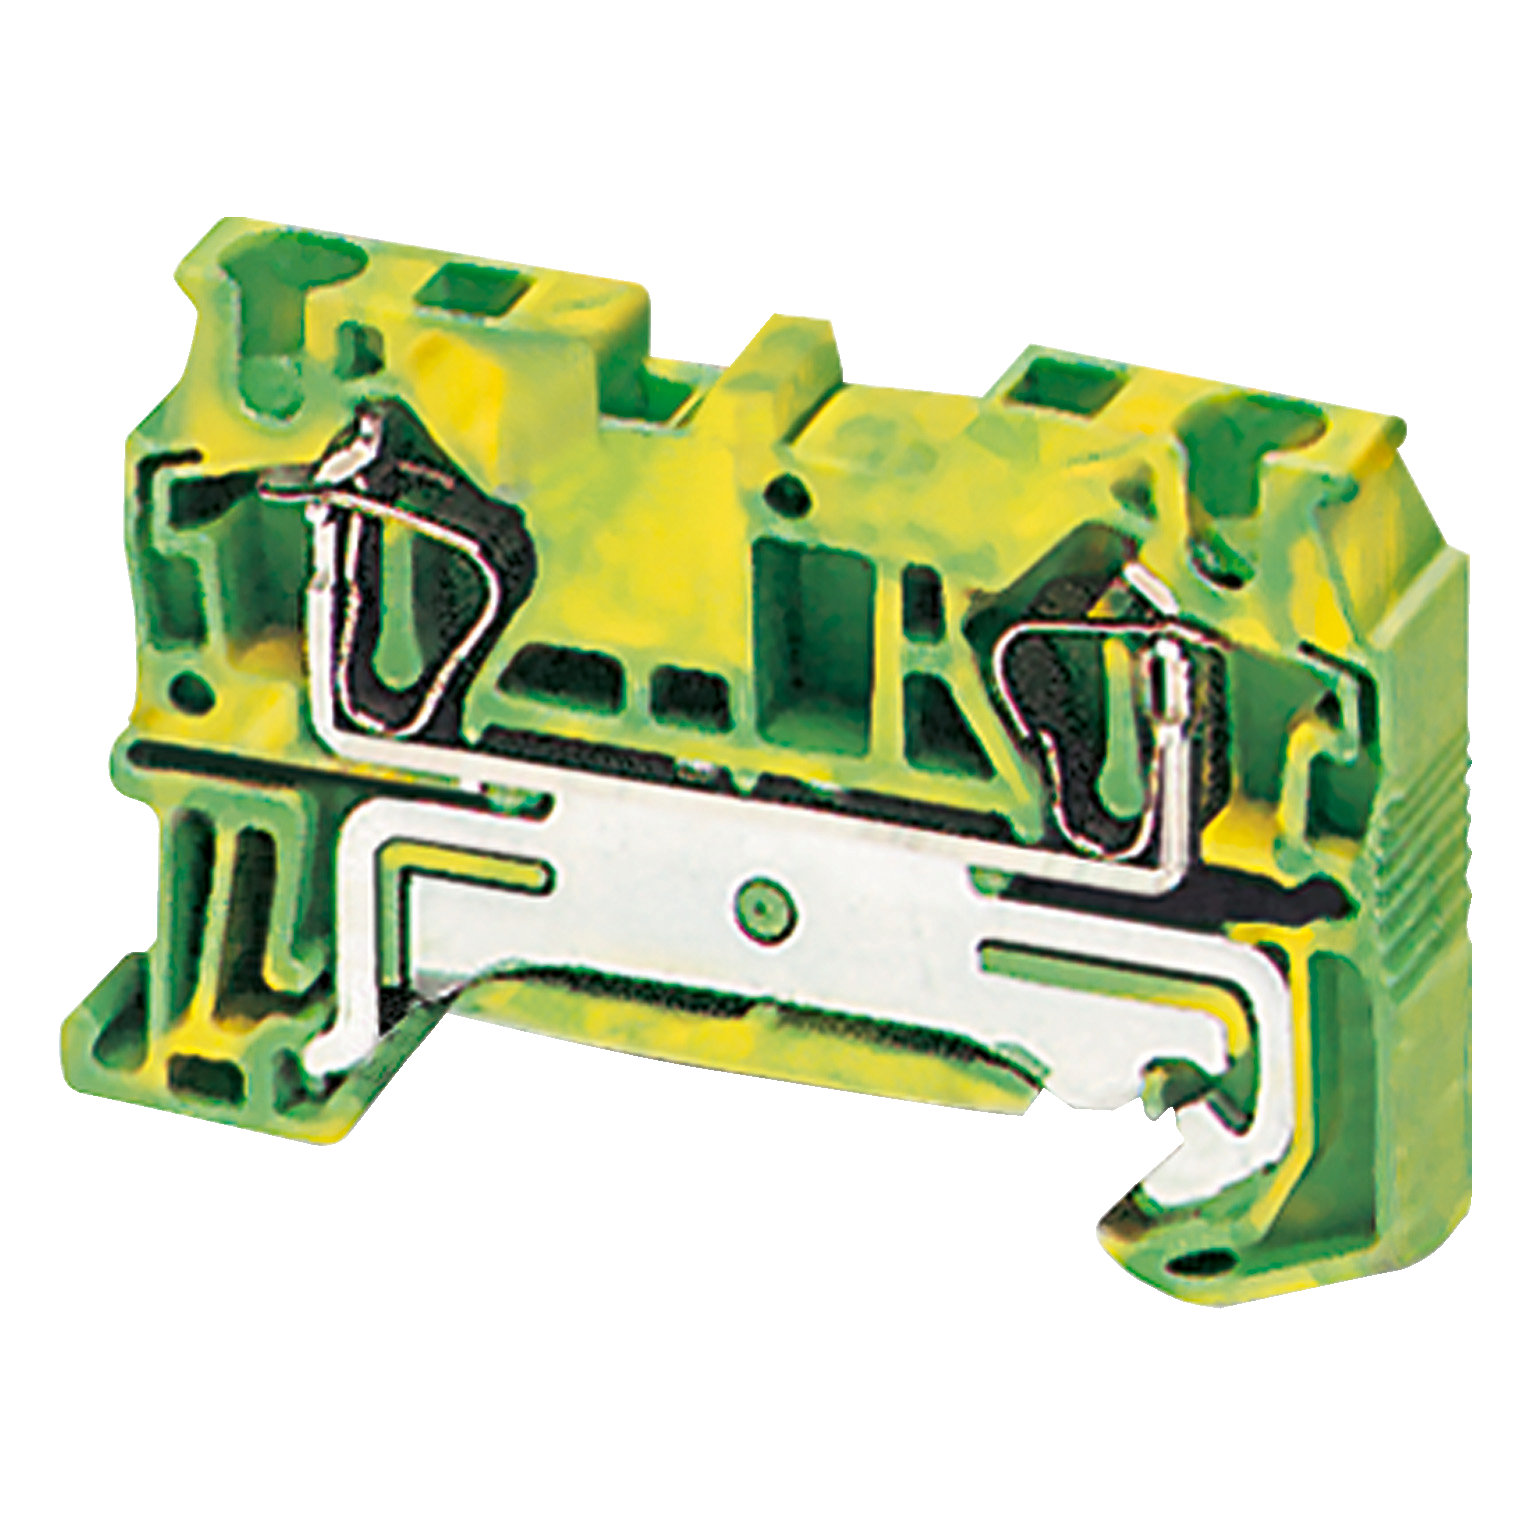 Terminal block, Linergy TR, spring type, protective earth, 2 points, 4mm², green-yellow, set of 50